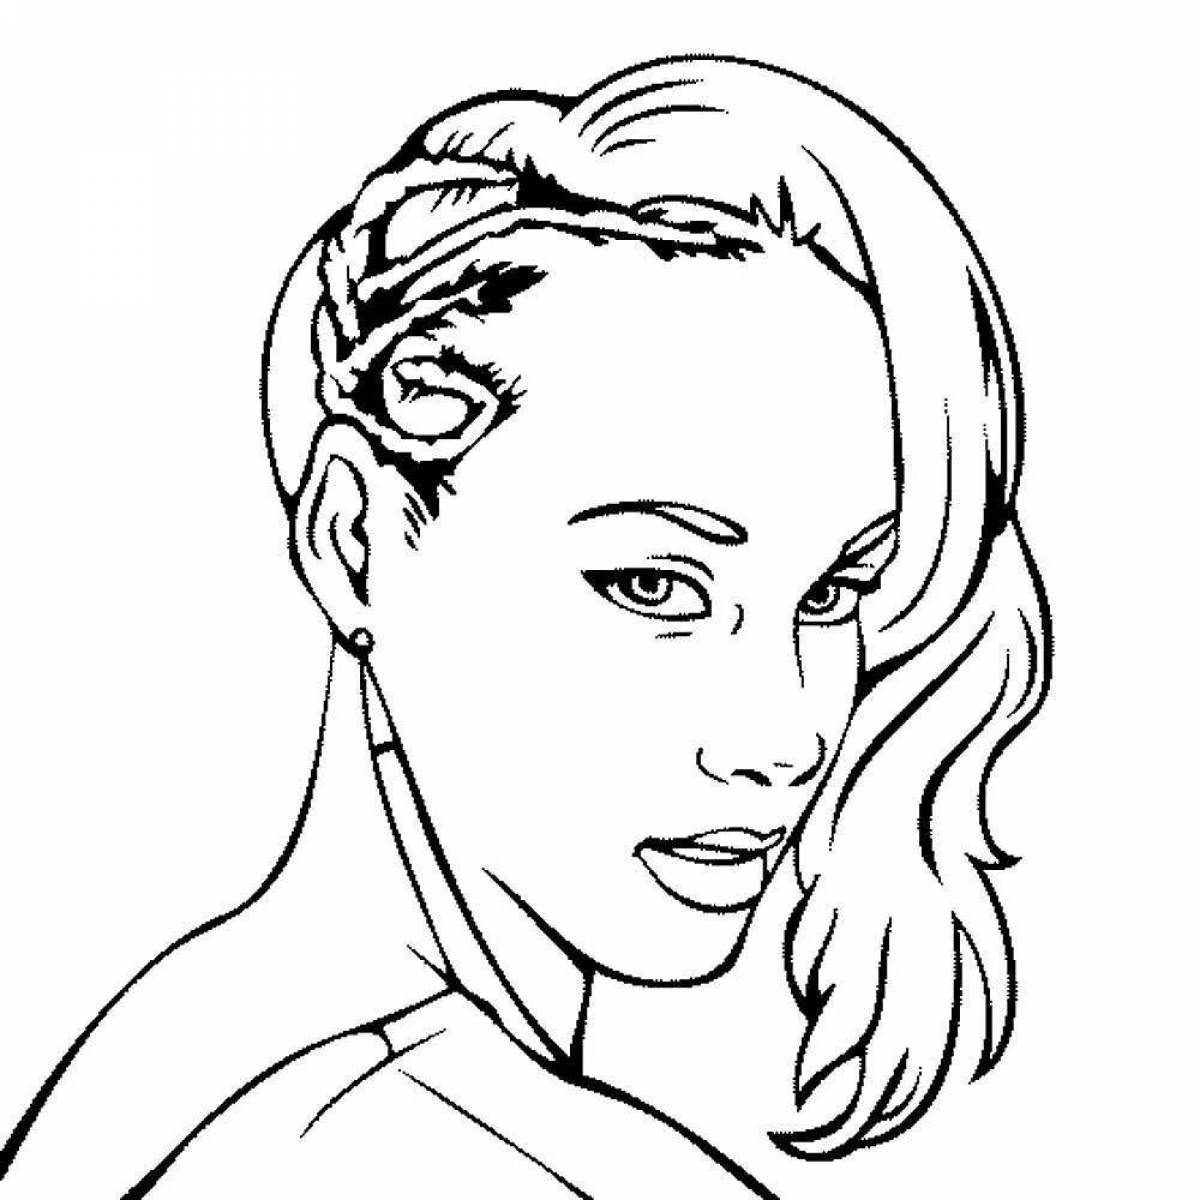 Coloring pages with portraits of people